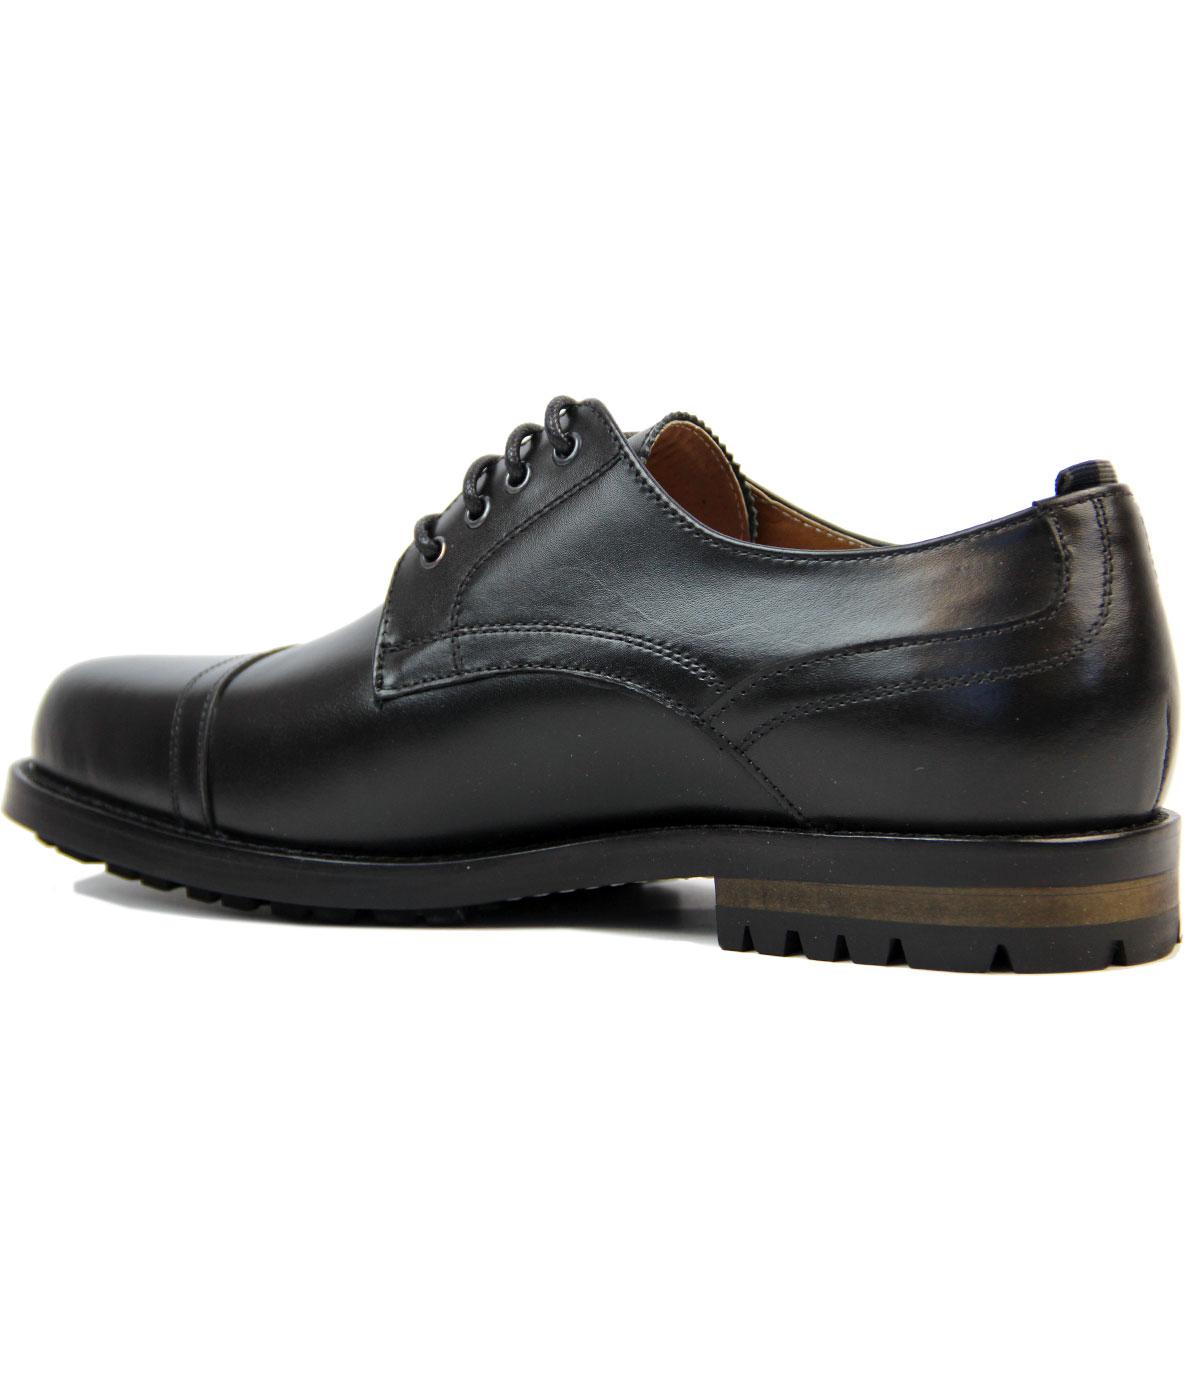 PETER WERTH Hardy Retro Mod Derby Shoes in Black Leather